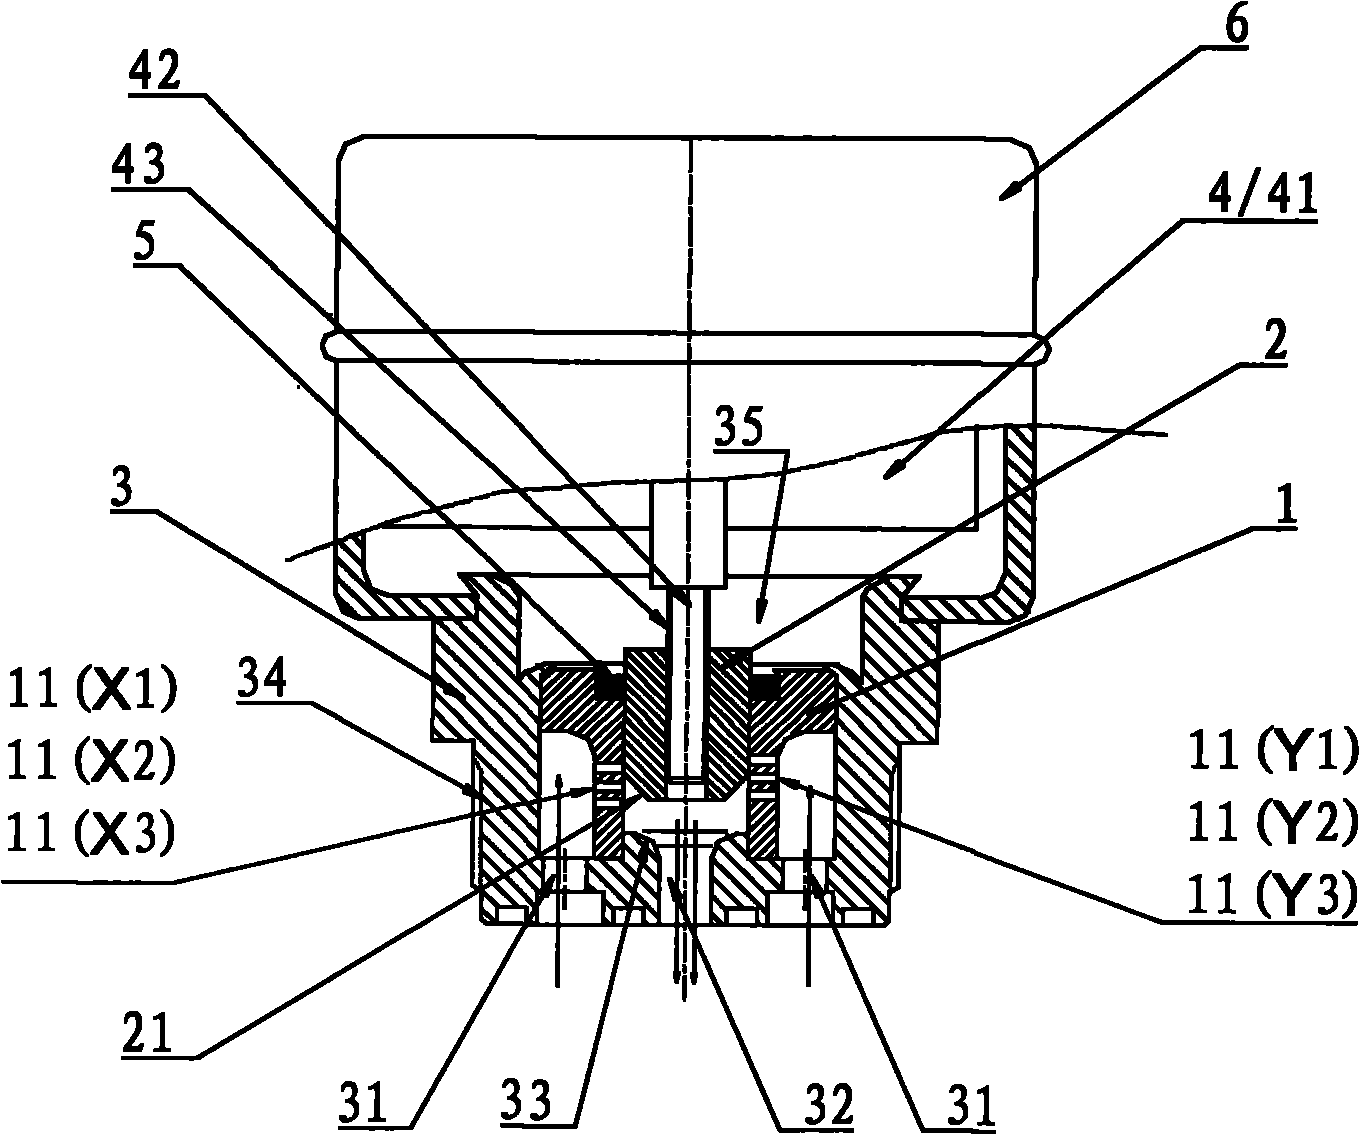 Electronic expansion valve structure